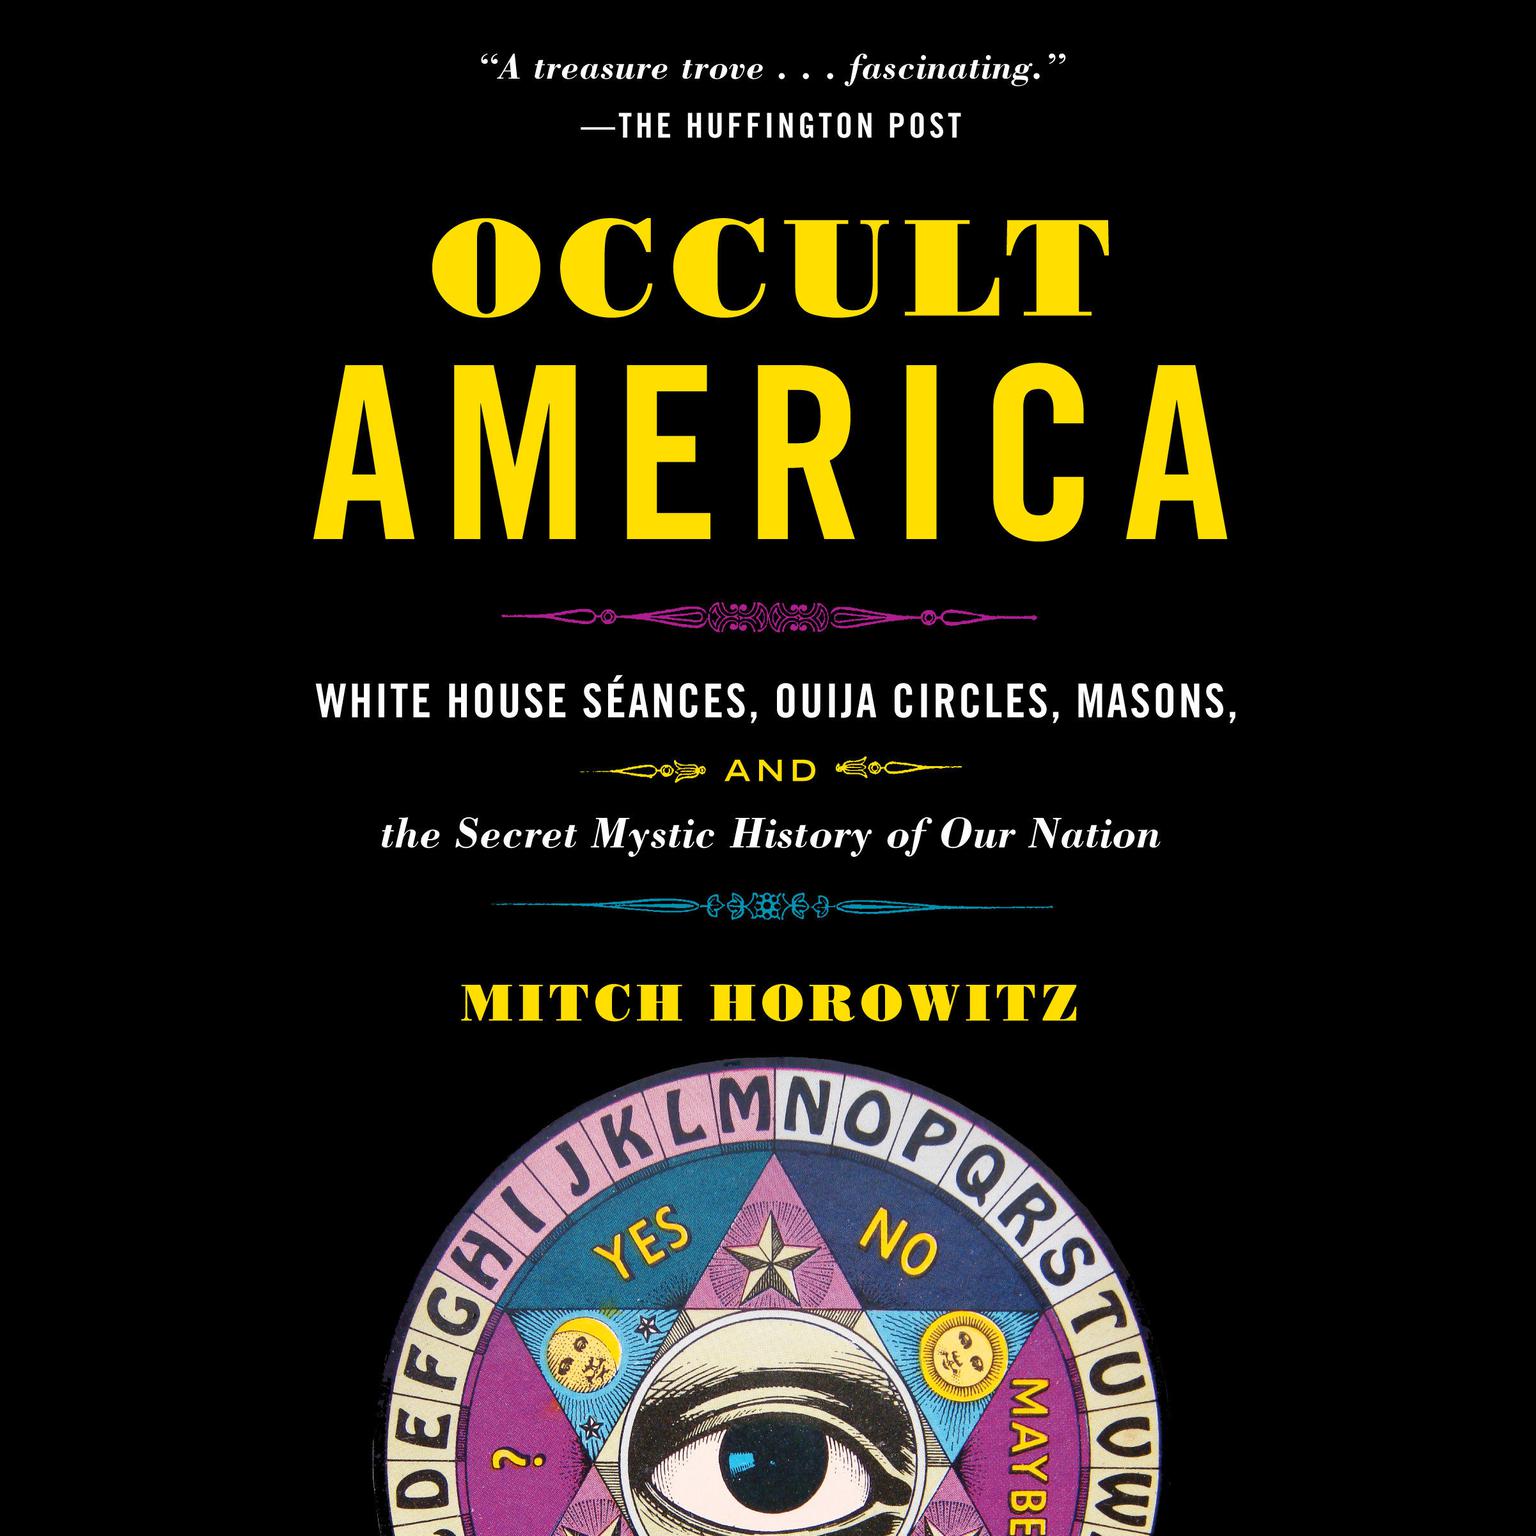 Occult America: White House Seances, Ouija Circles, Masons, and the Secret Mystic History of Our Nation Audiobook, by Mitch Horowitz